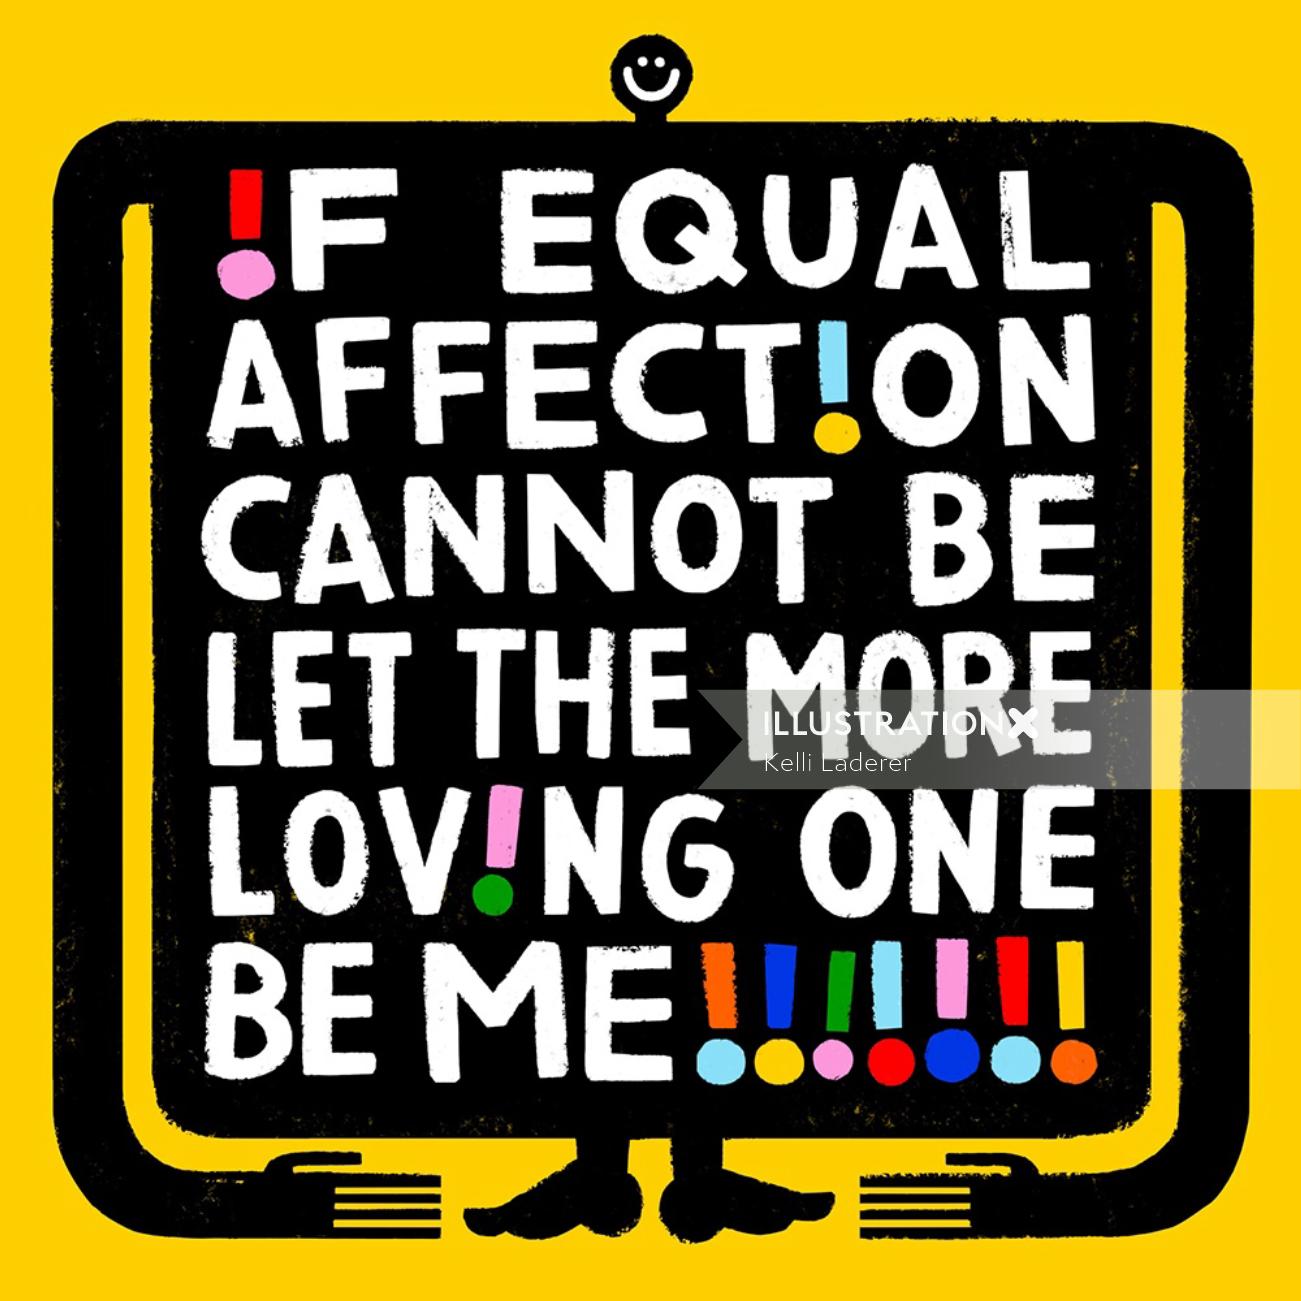 Calligraphy art of if equal affect on cannot be let the more loving on be me